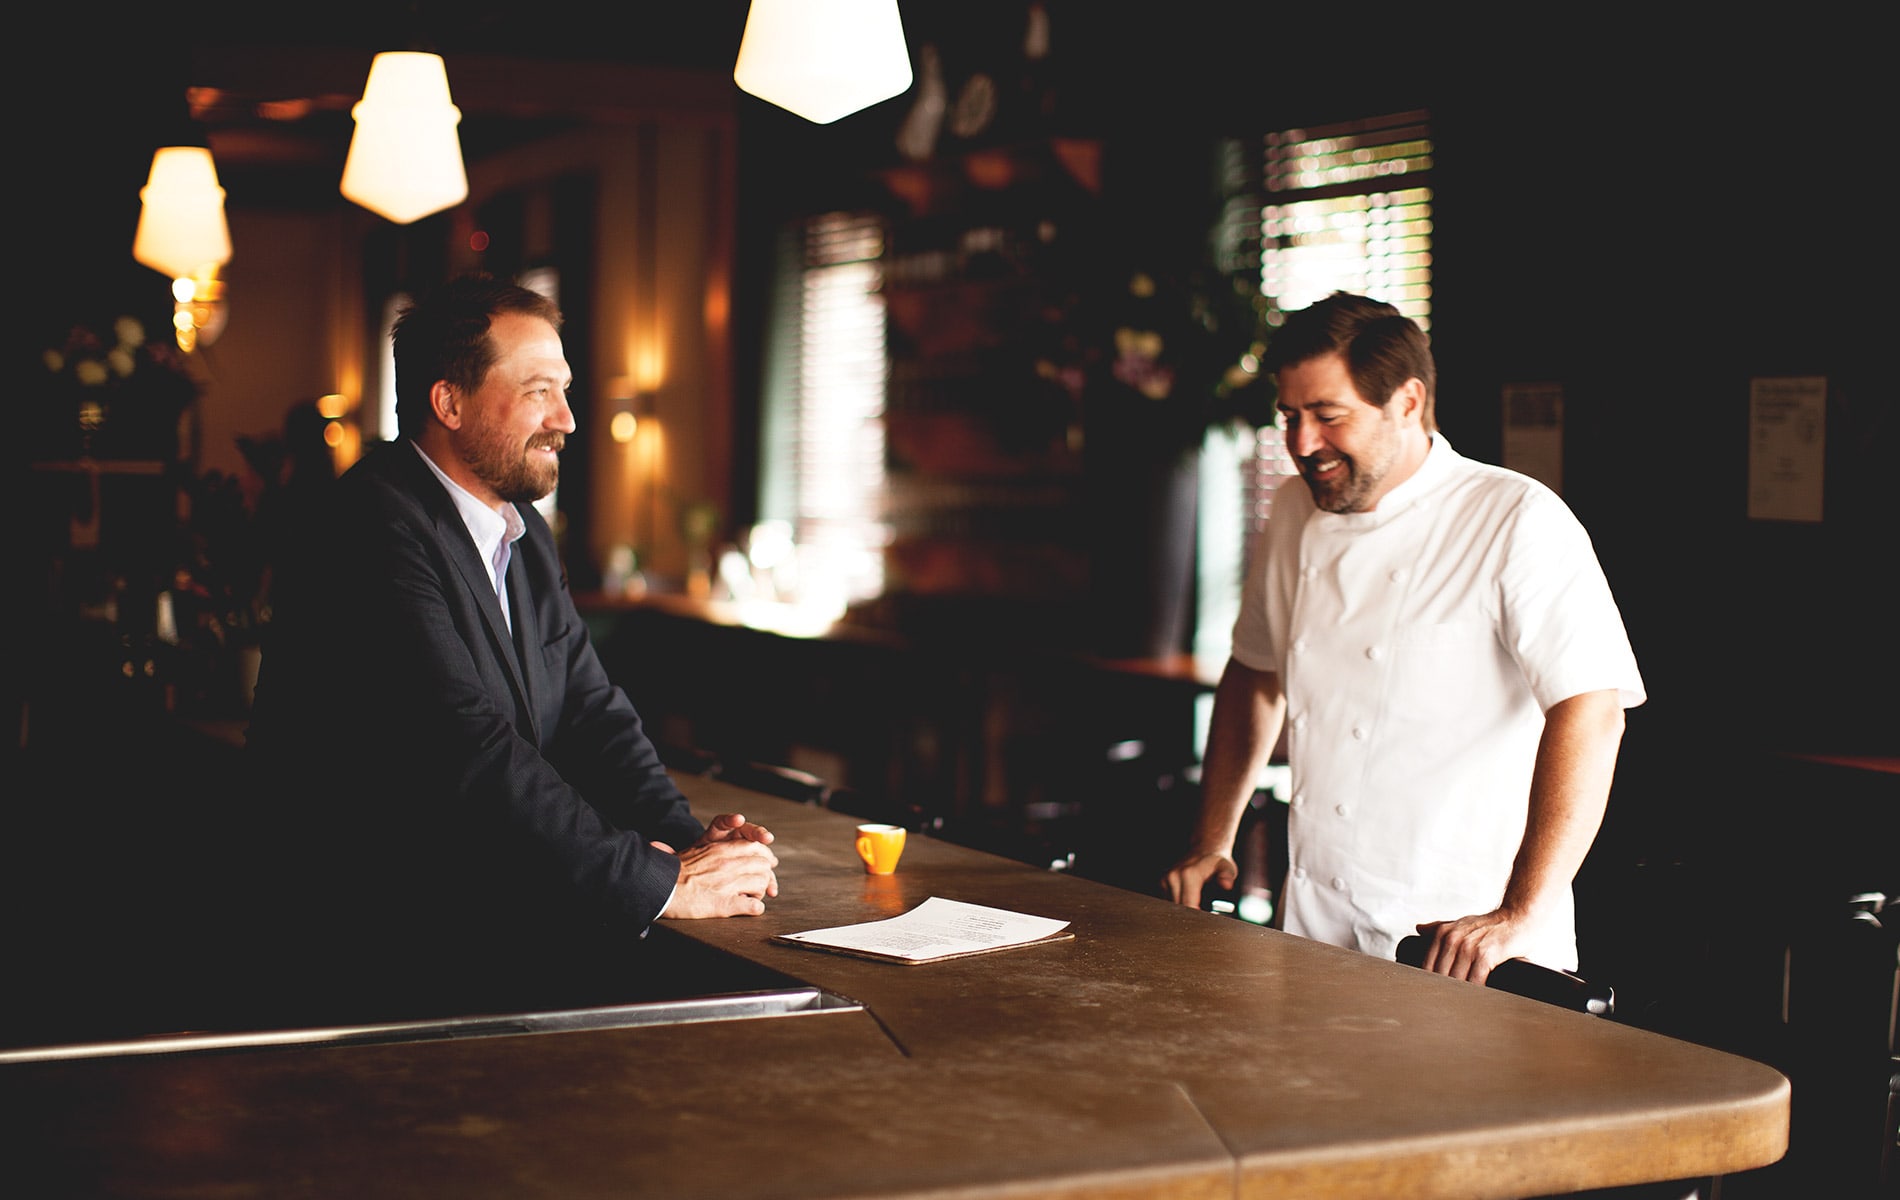 FIG owners/founders Adam Nemirow and chef Mike Lata